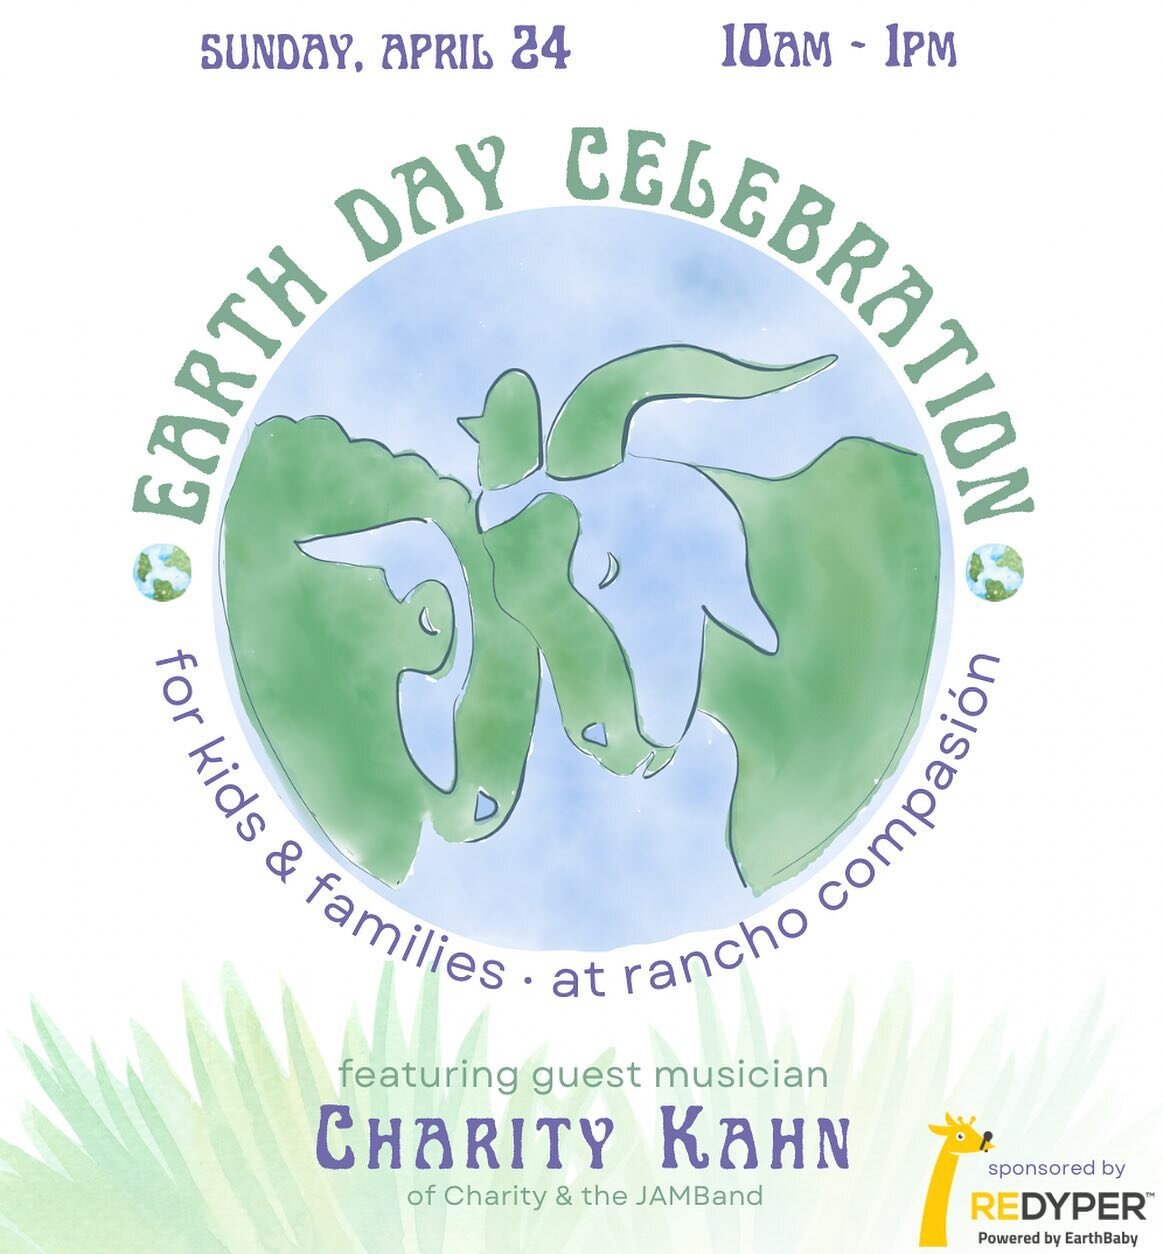 🐣🌎Join us in a fun-filled celebration of Mother Earth at Rancho Compasi&oacute;n! We&rsquo;re opening our doors to young kids &amp; babies to meet the rescued sanctuary residents, explore the sanctuary grounds, engage in zero-waste activities, and 